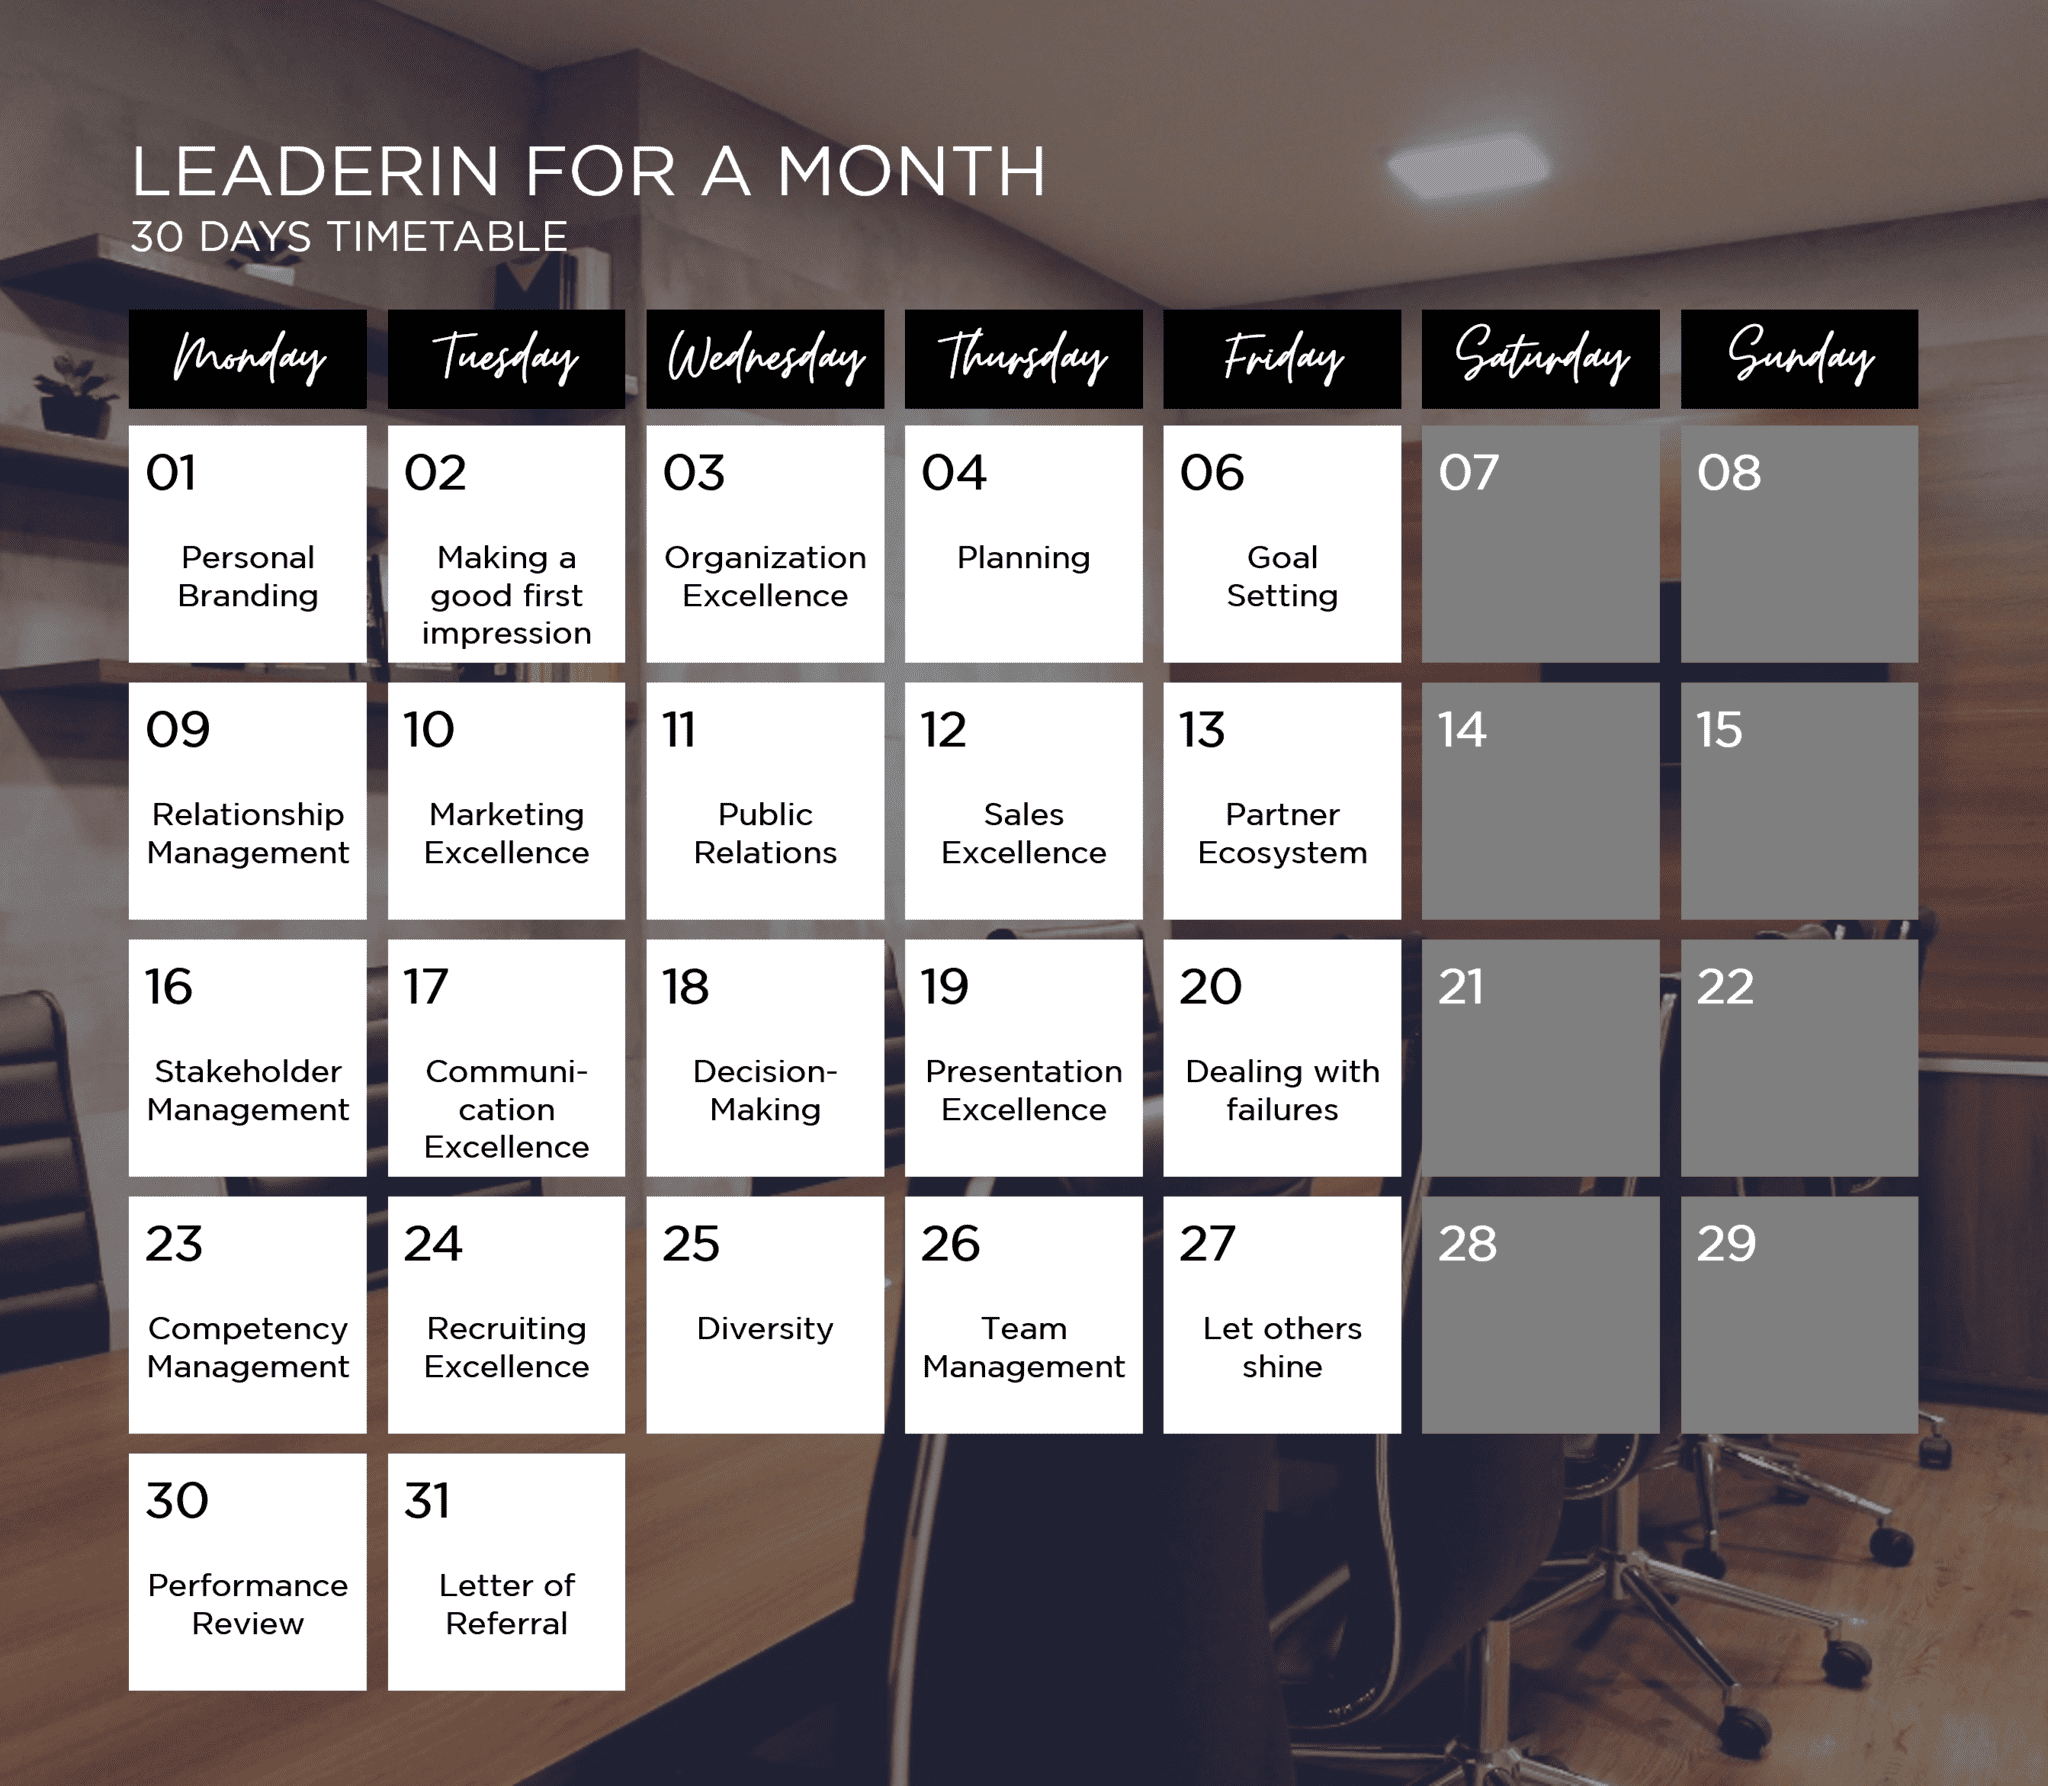 LeaderIn for a month Schedule